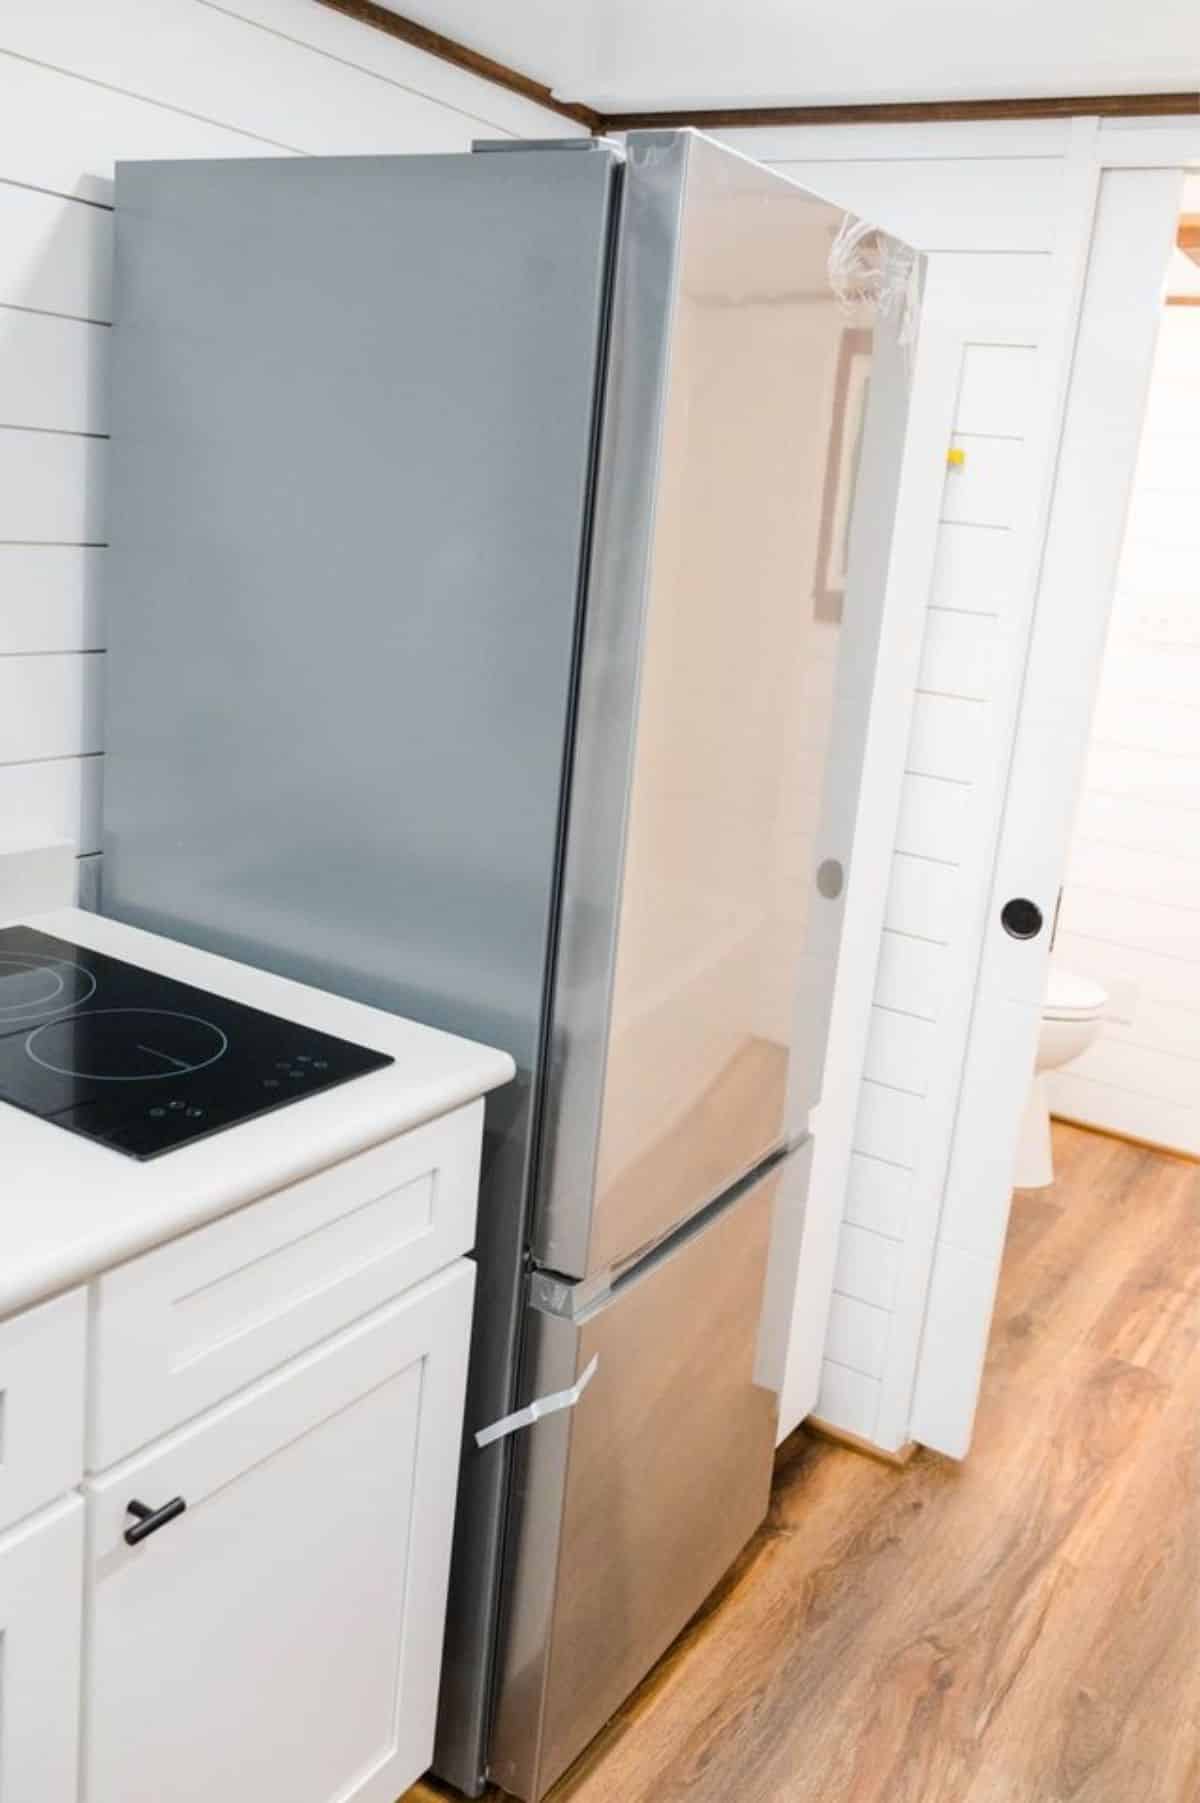 Double door refrigerator and other kitchen appliances are included in the deal